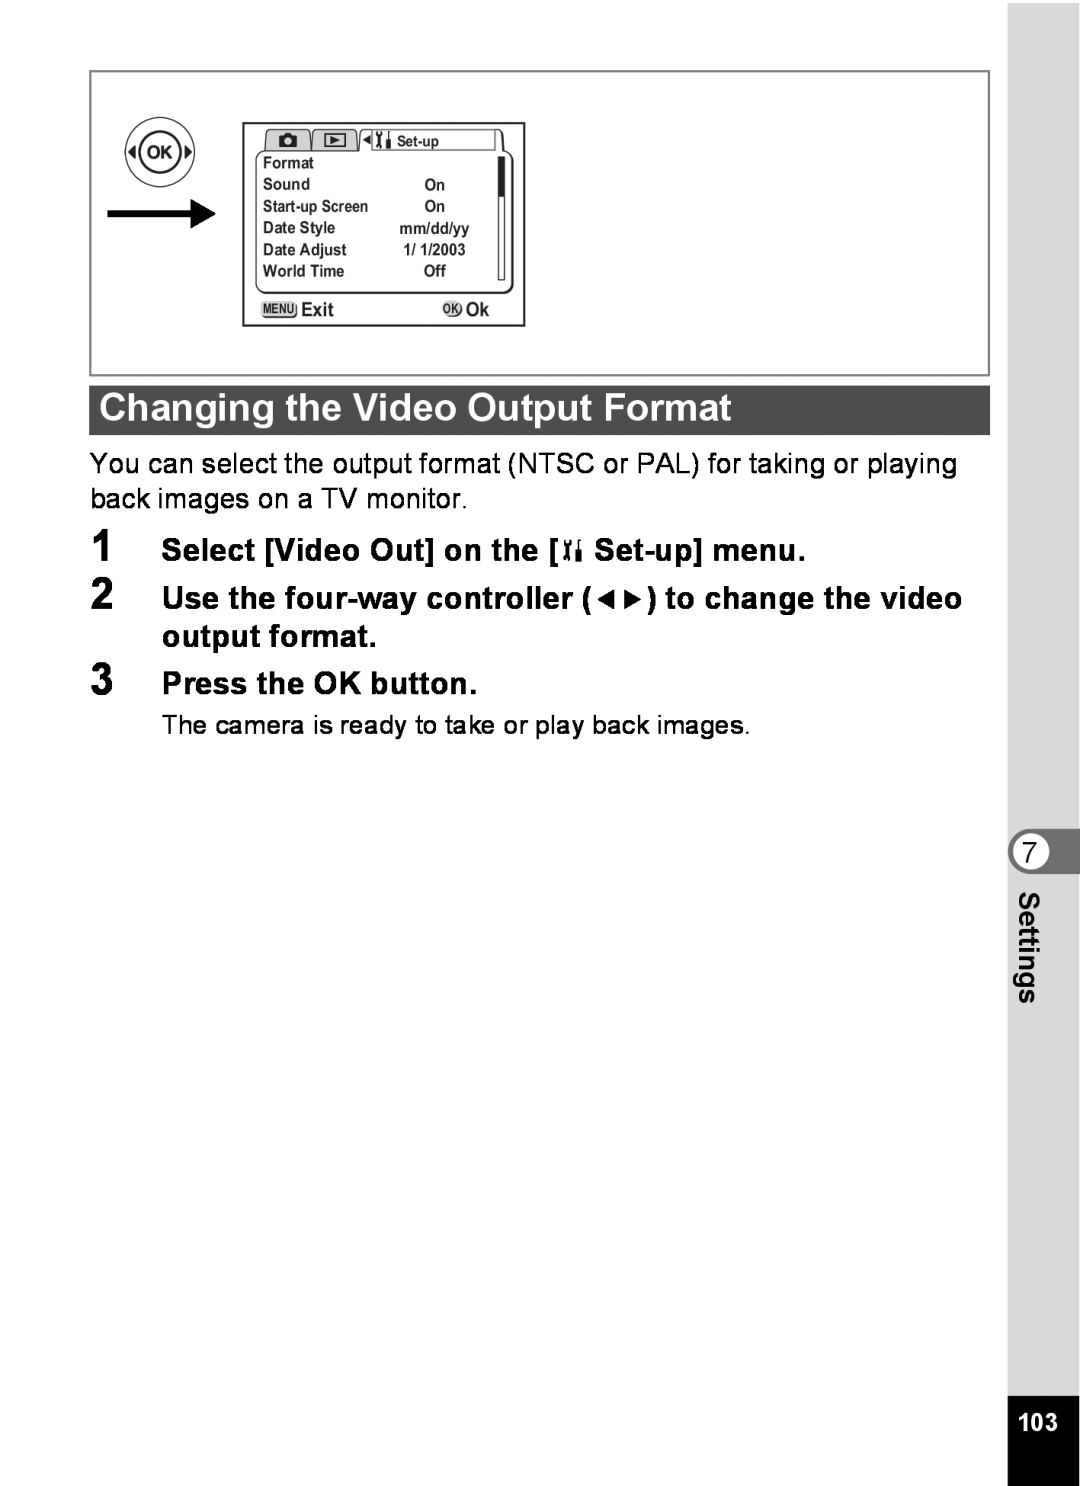 Pentax S4 manual Changing the Video Output Format, Select Video Out on the B Set-up menu, Press the OK button, Settings 